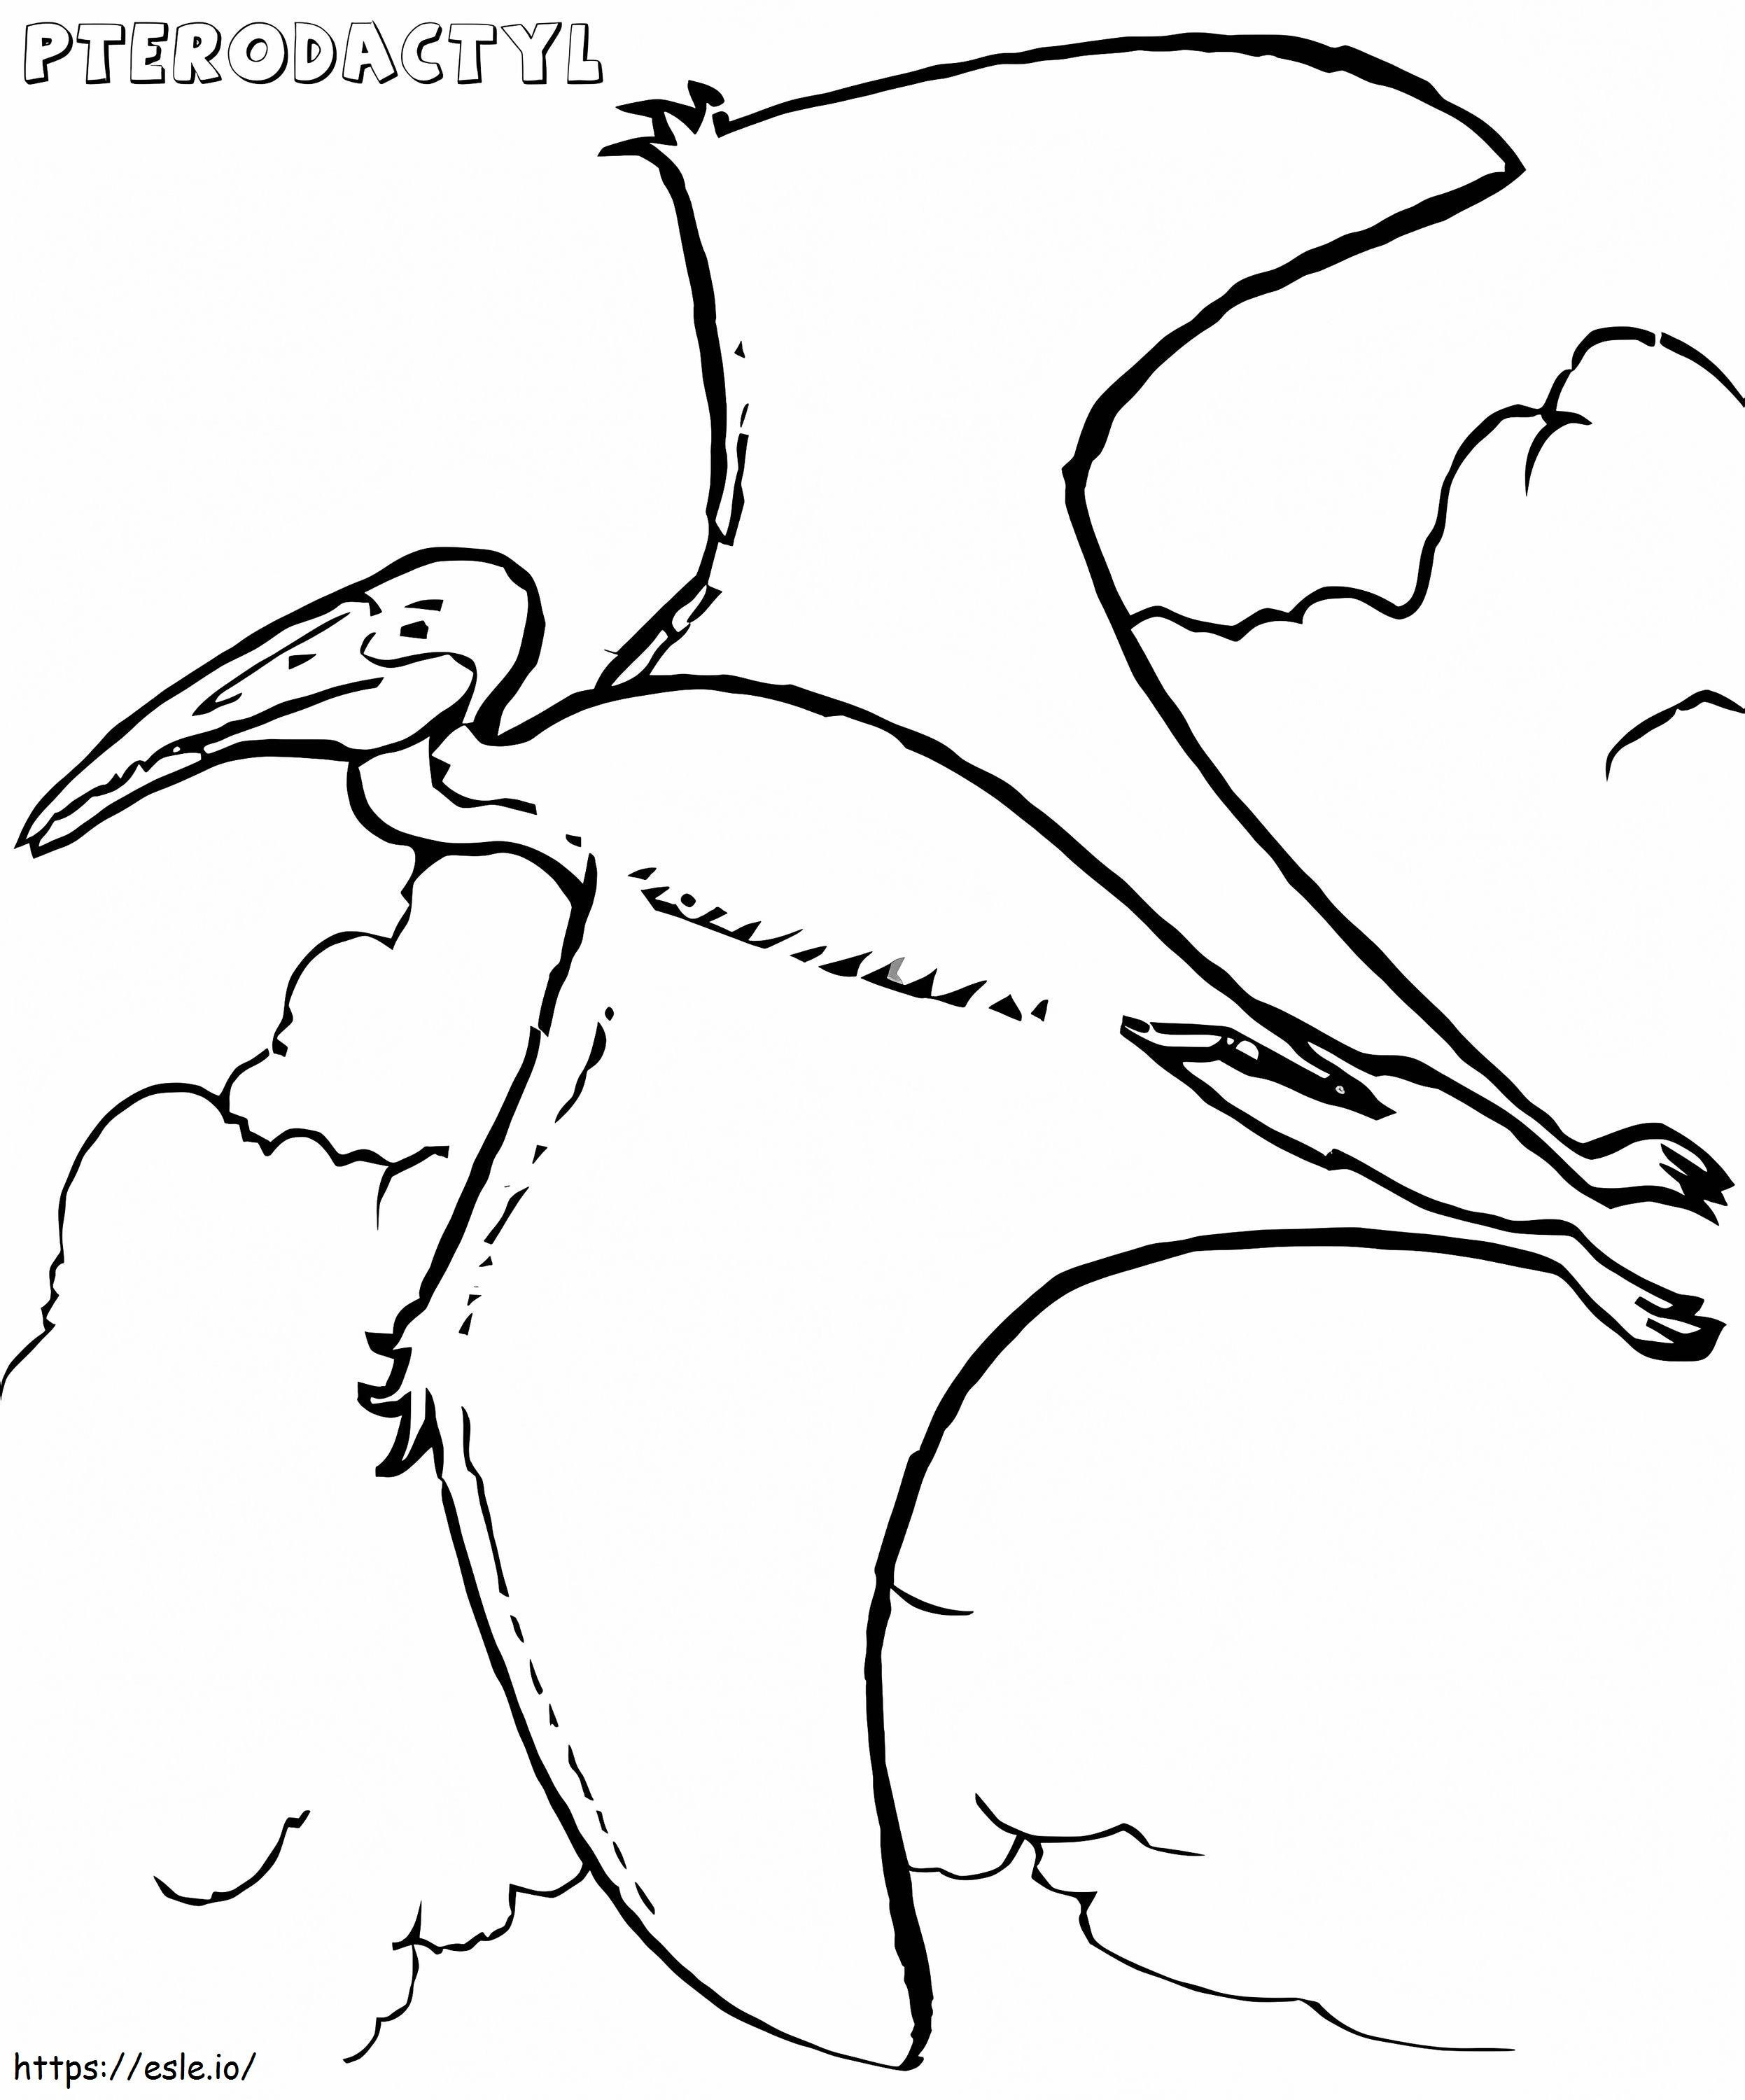 Flying Pterodactyl coloring page